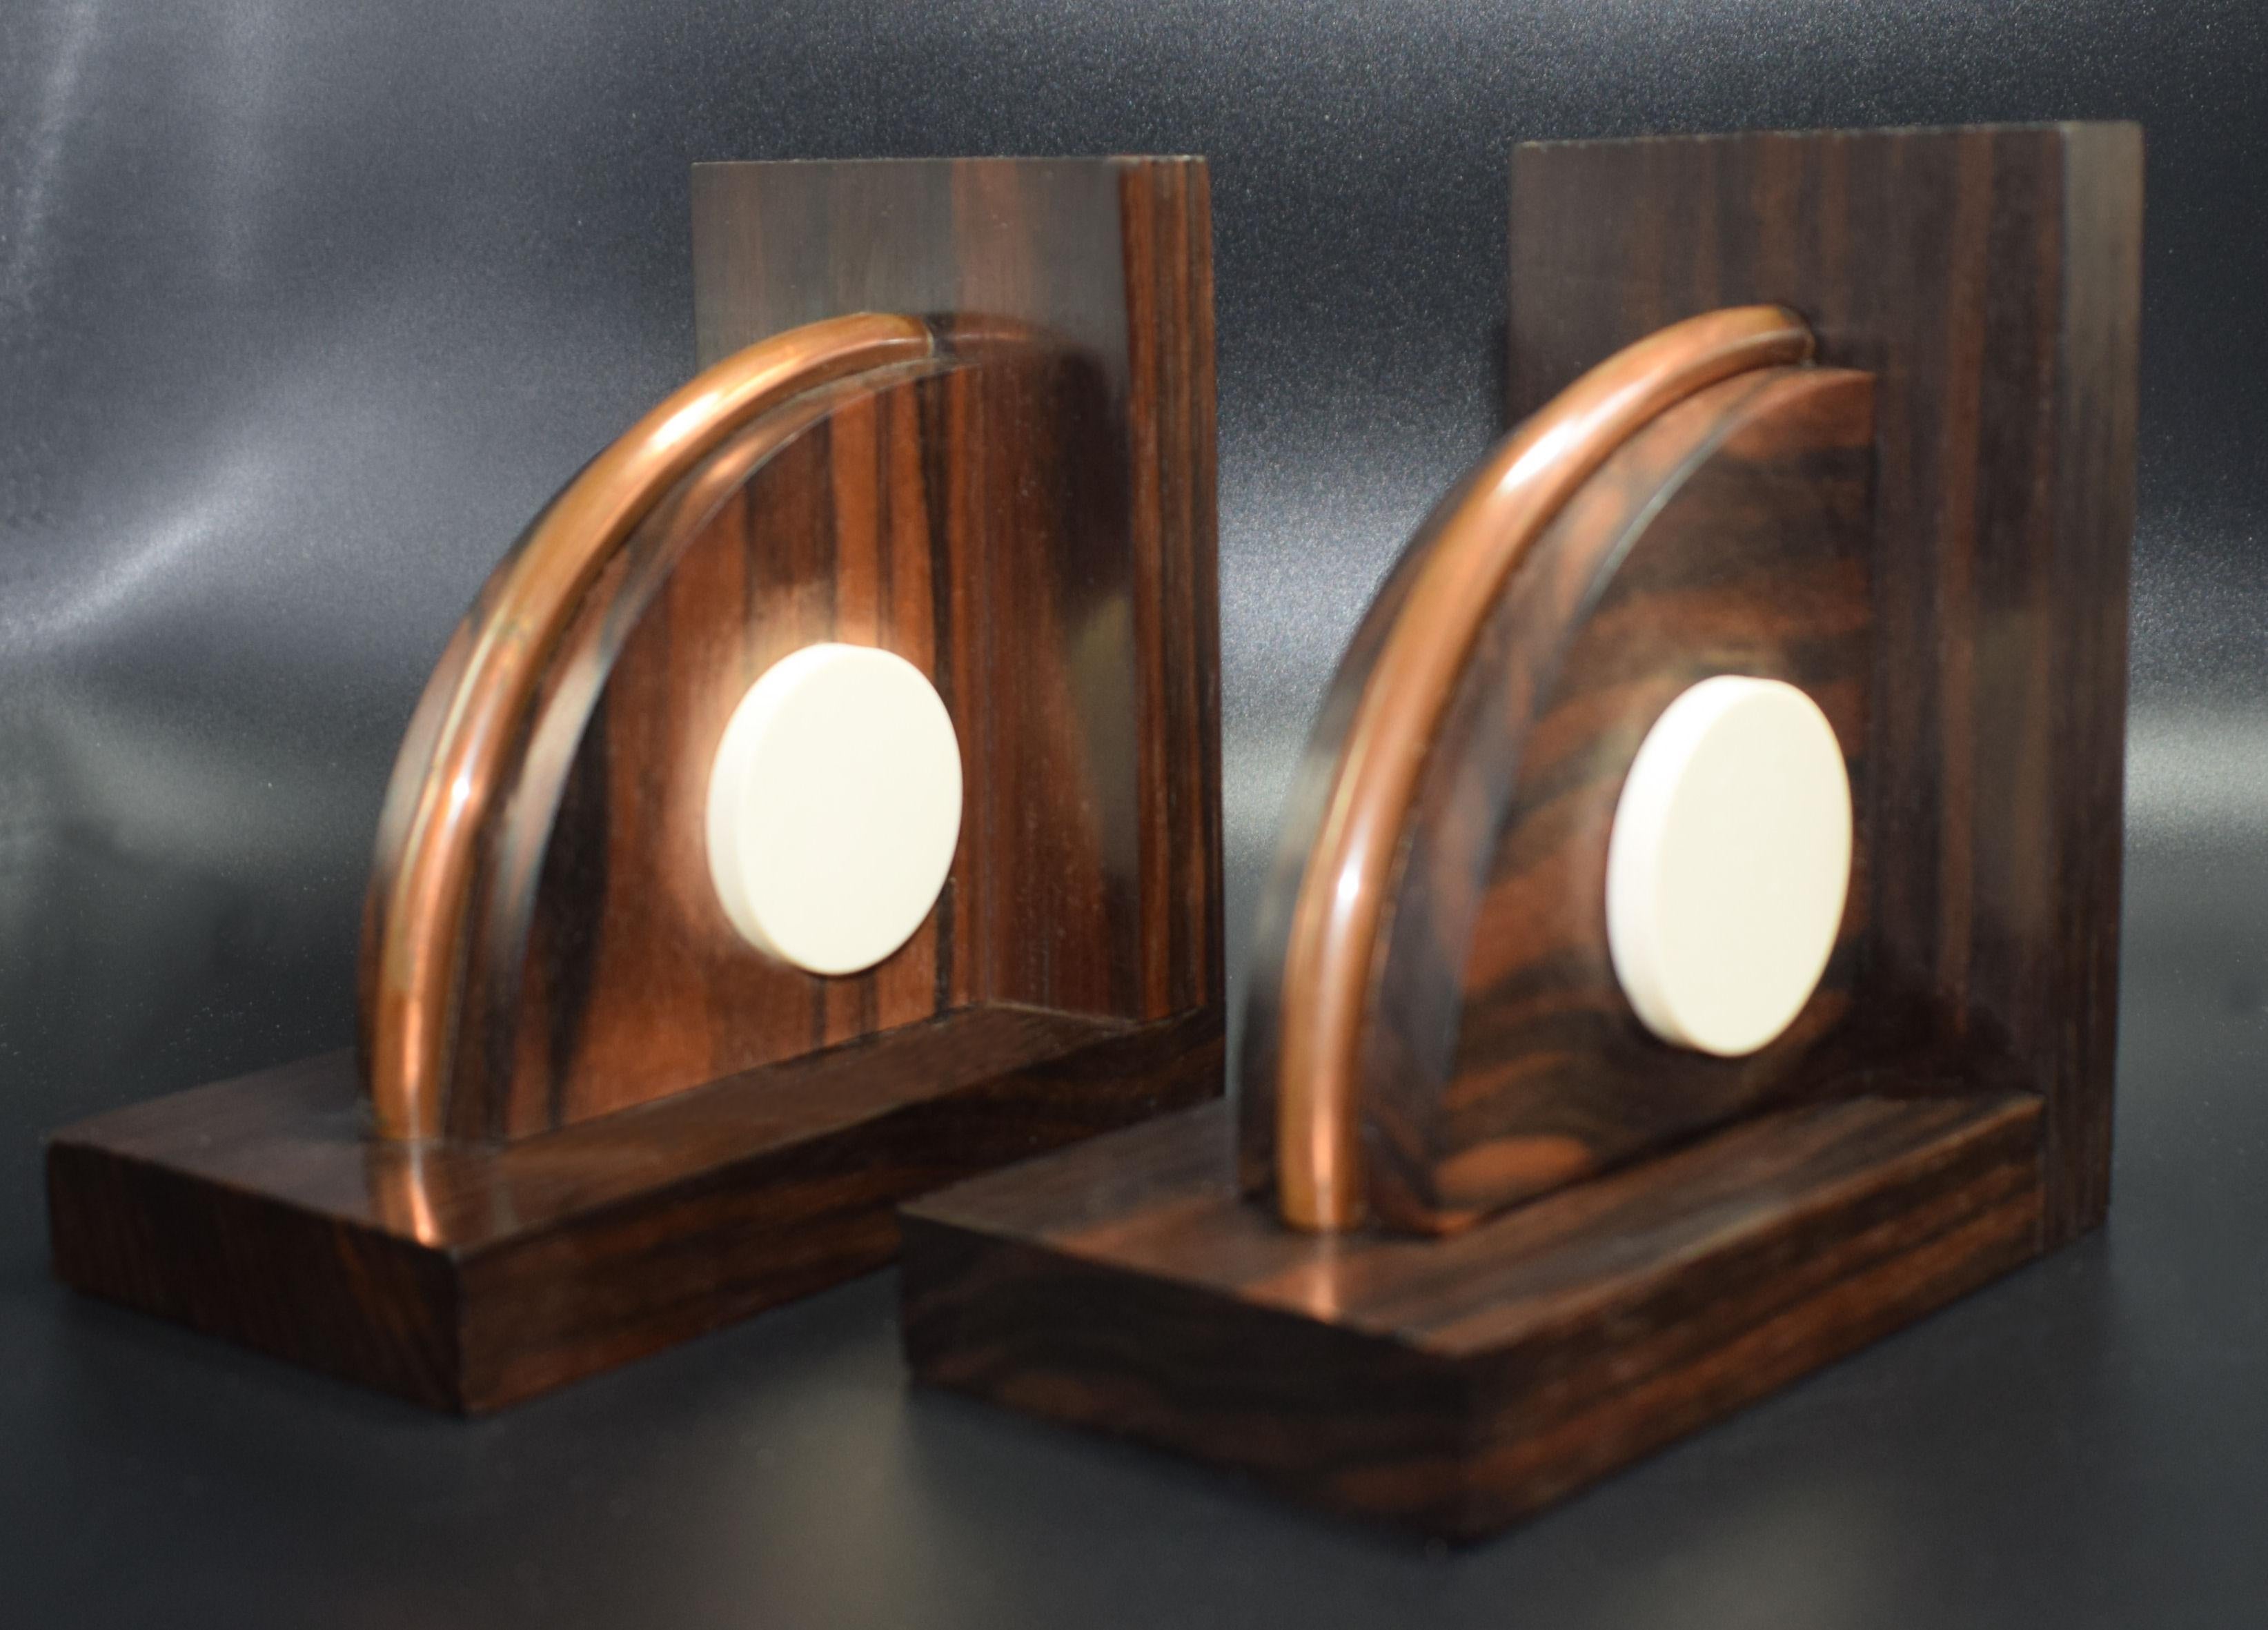 Fabulous matching pair of modernist 1930s bookends originates from France and made from Macassar ebony with Bakelite and copper accents. Condition is very good. Stamped 'Made in France' and retaining original labels.